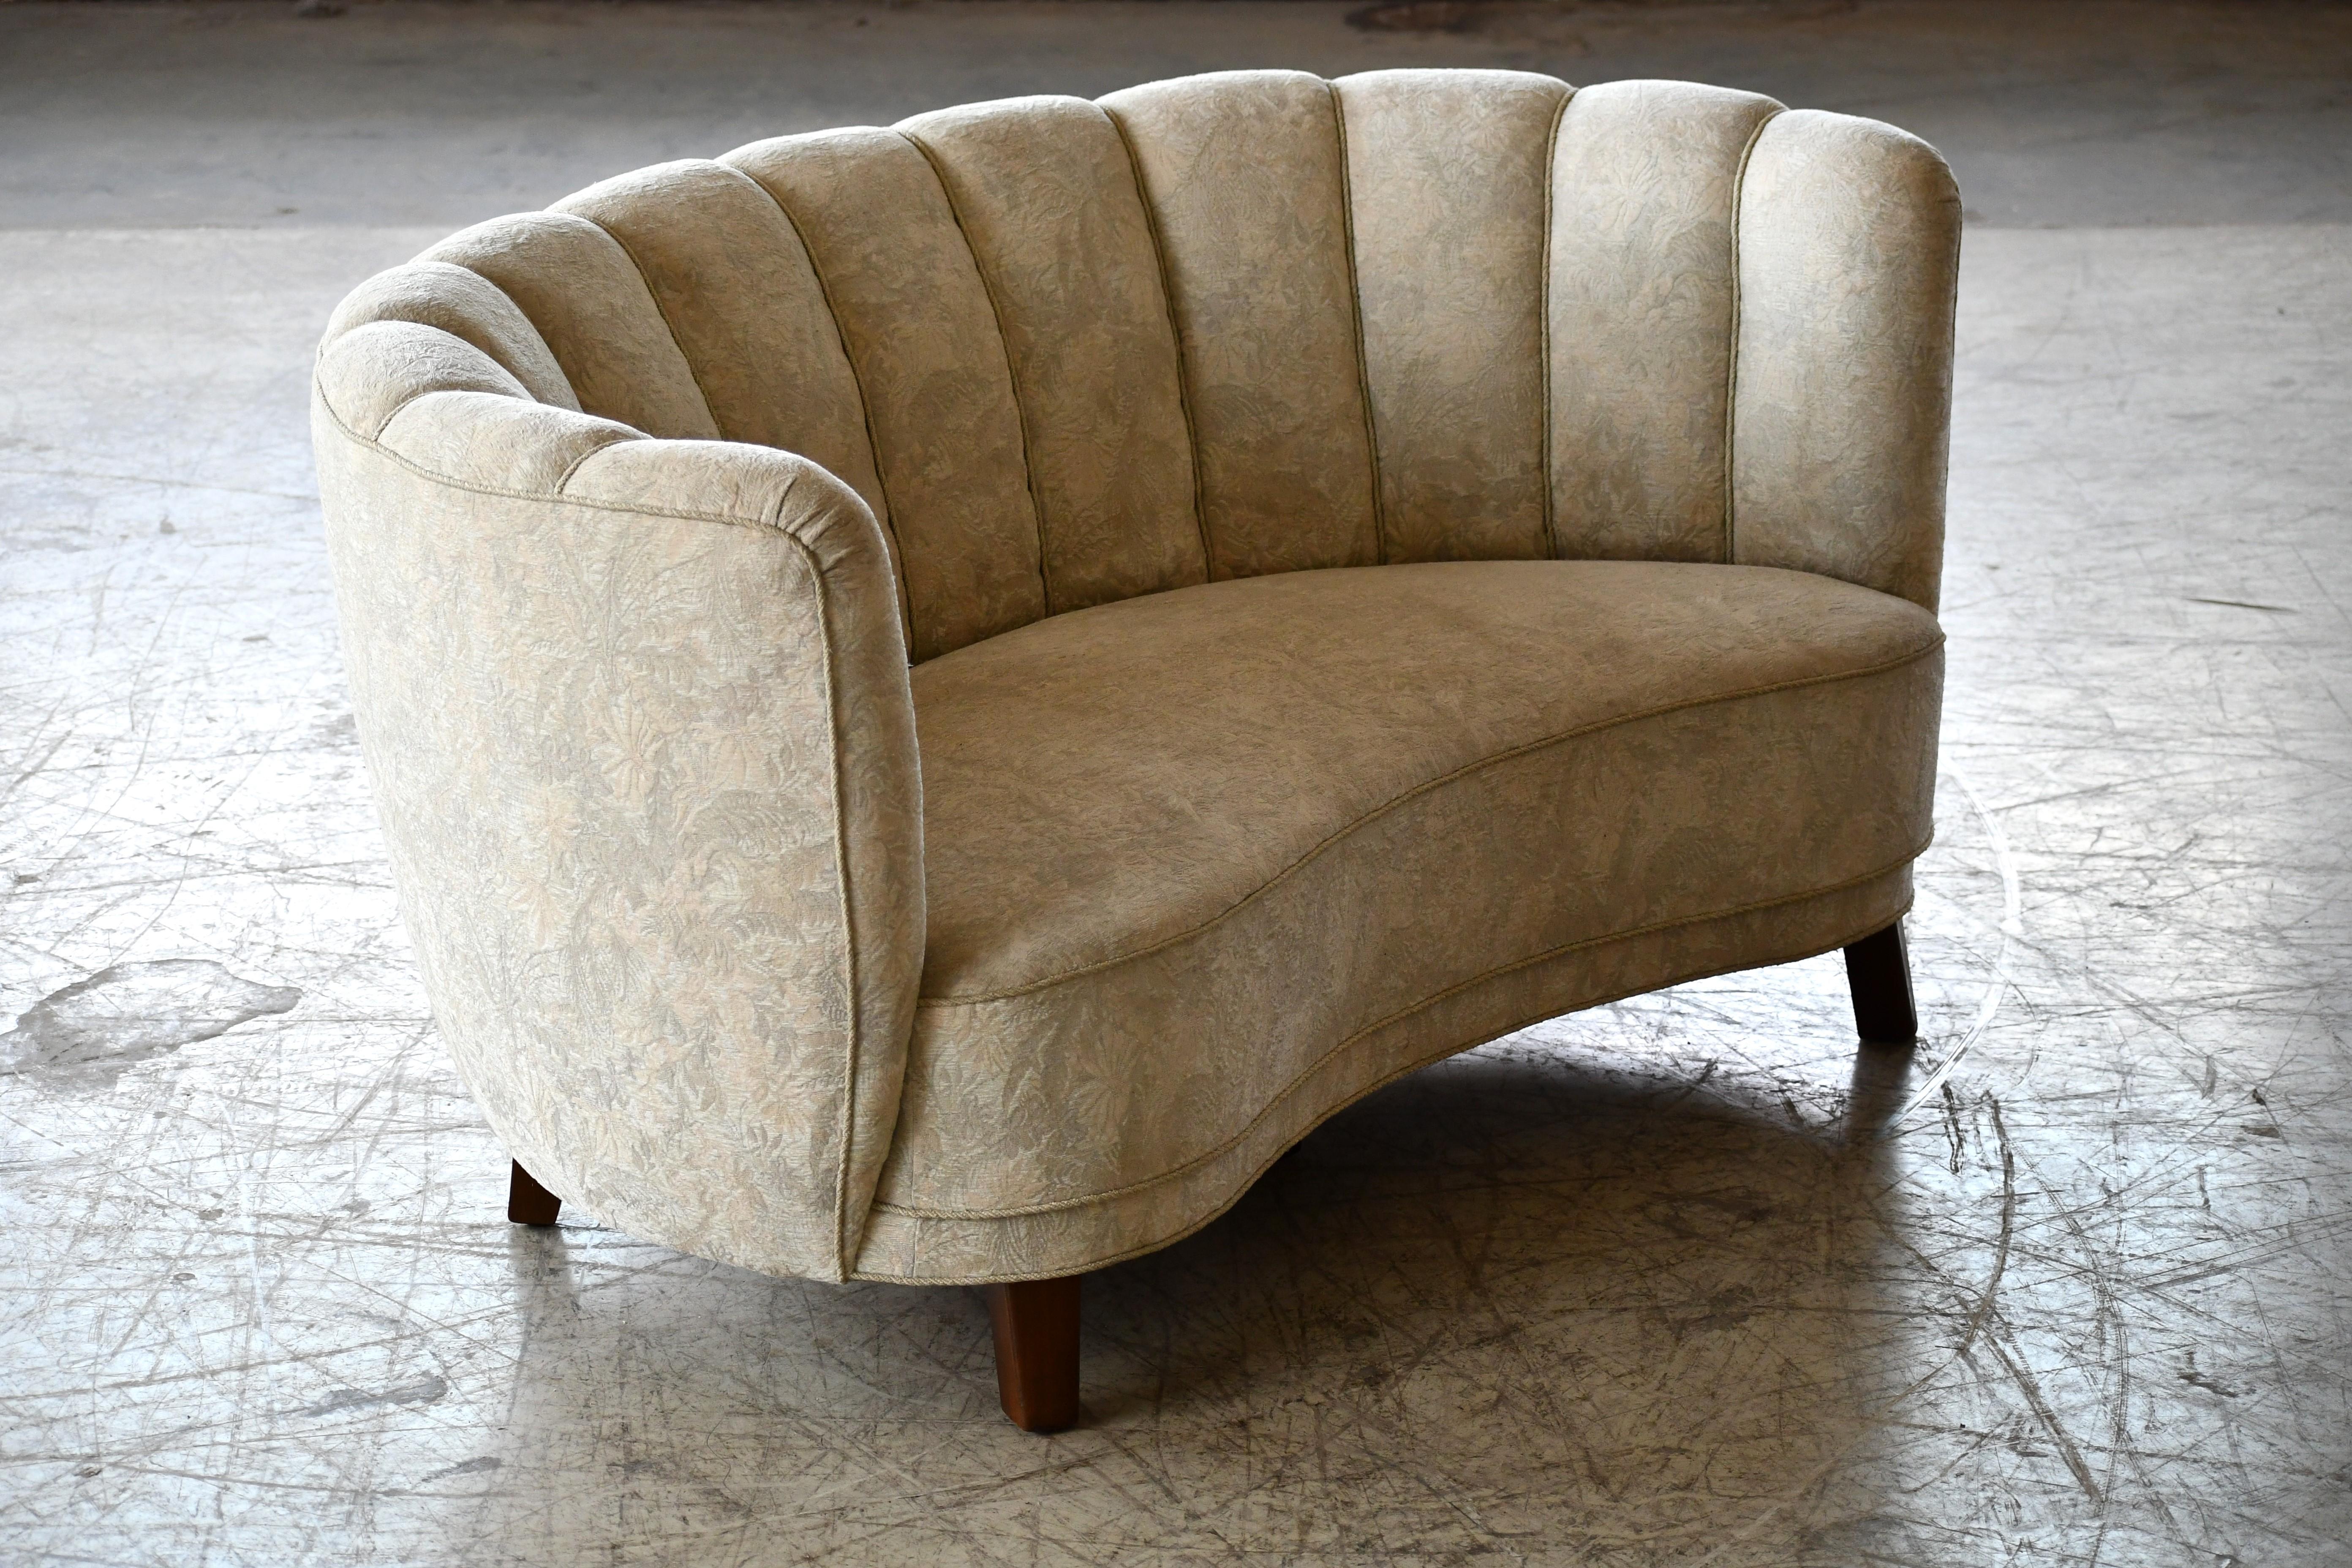 Beautiful and very elegant 1940s curved two-seat sofa or loveseat in white wool fabric. This sofa has slightly taller legs indicating a production date closer to 1950 when taller legs became more popular. The sofa has springs in the seat and the